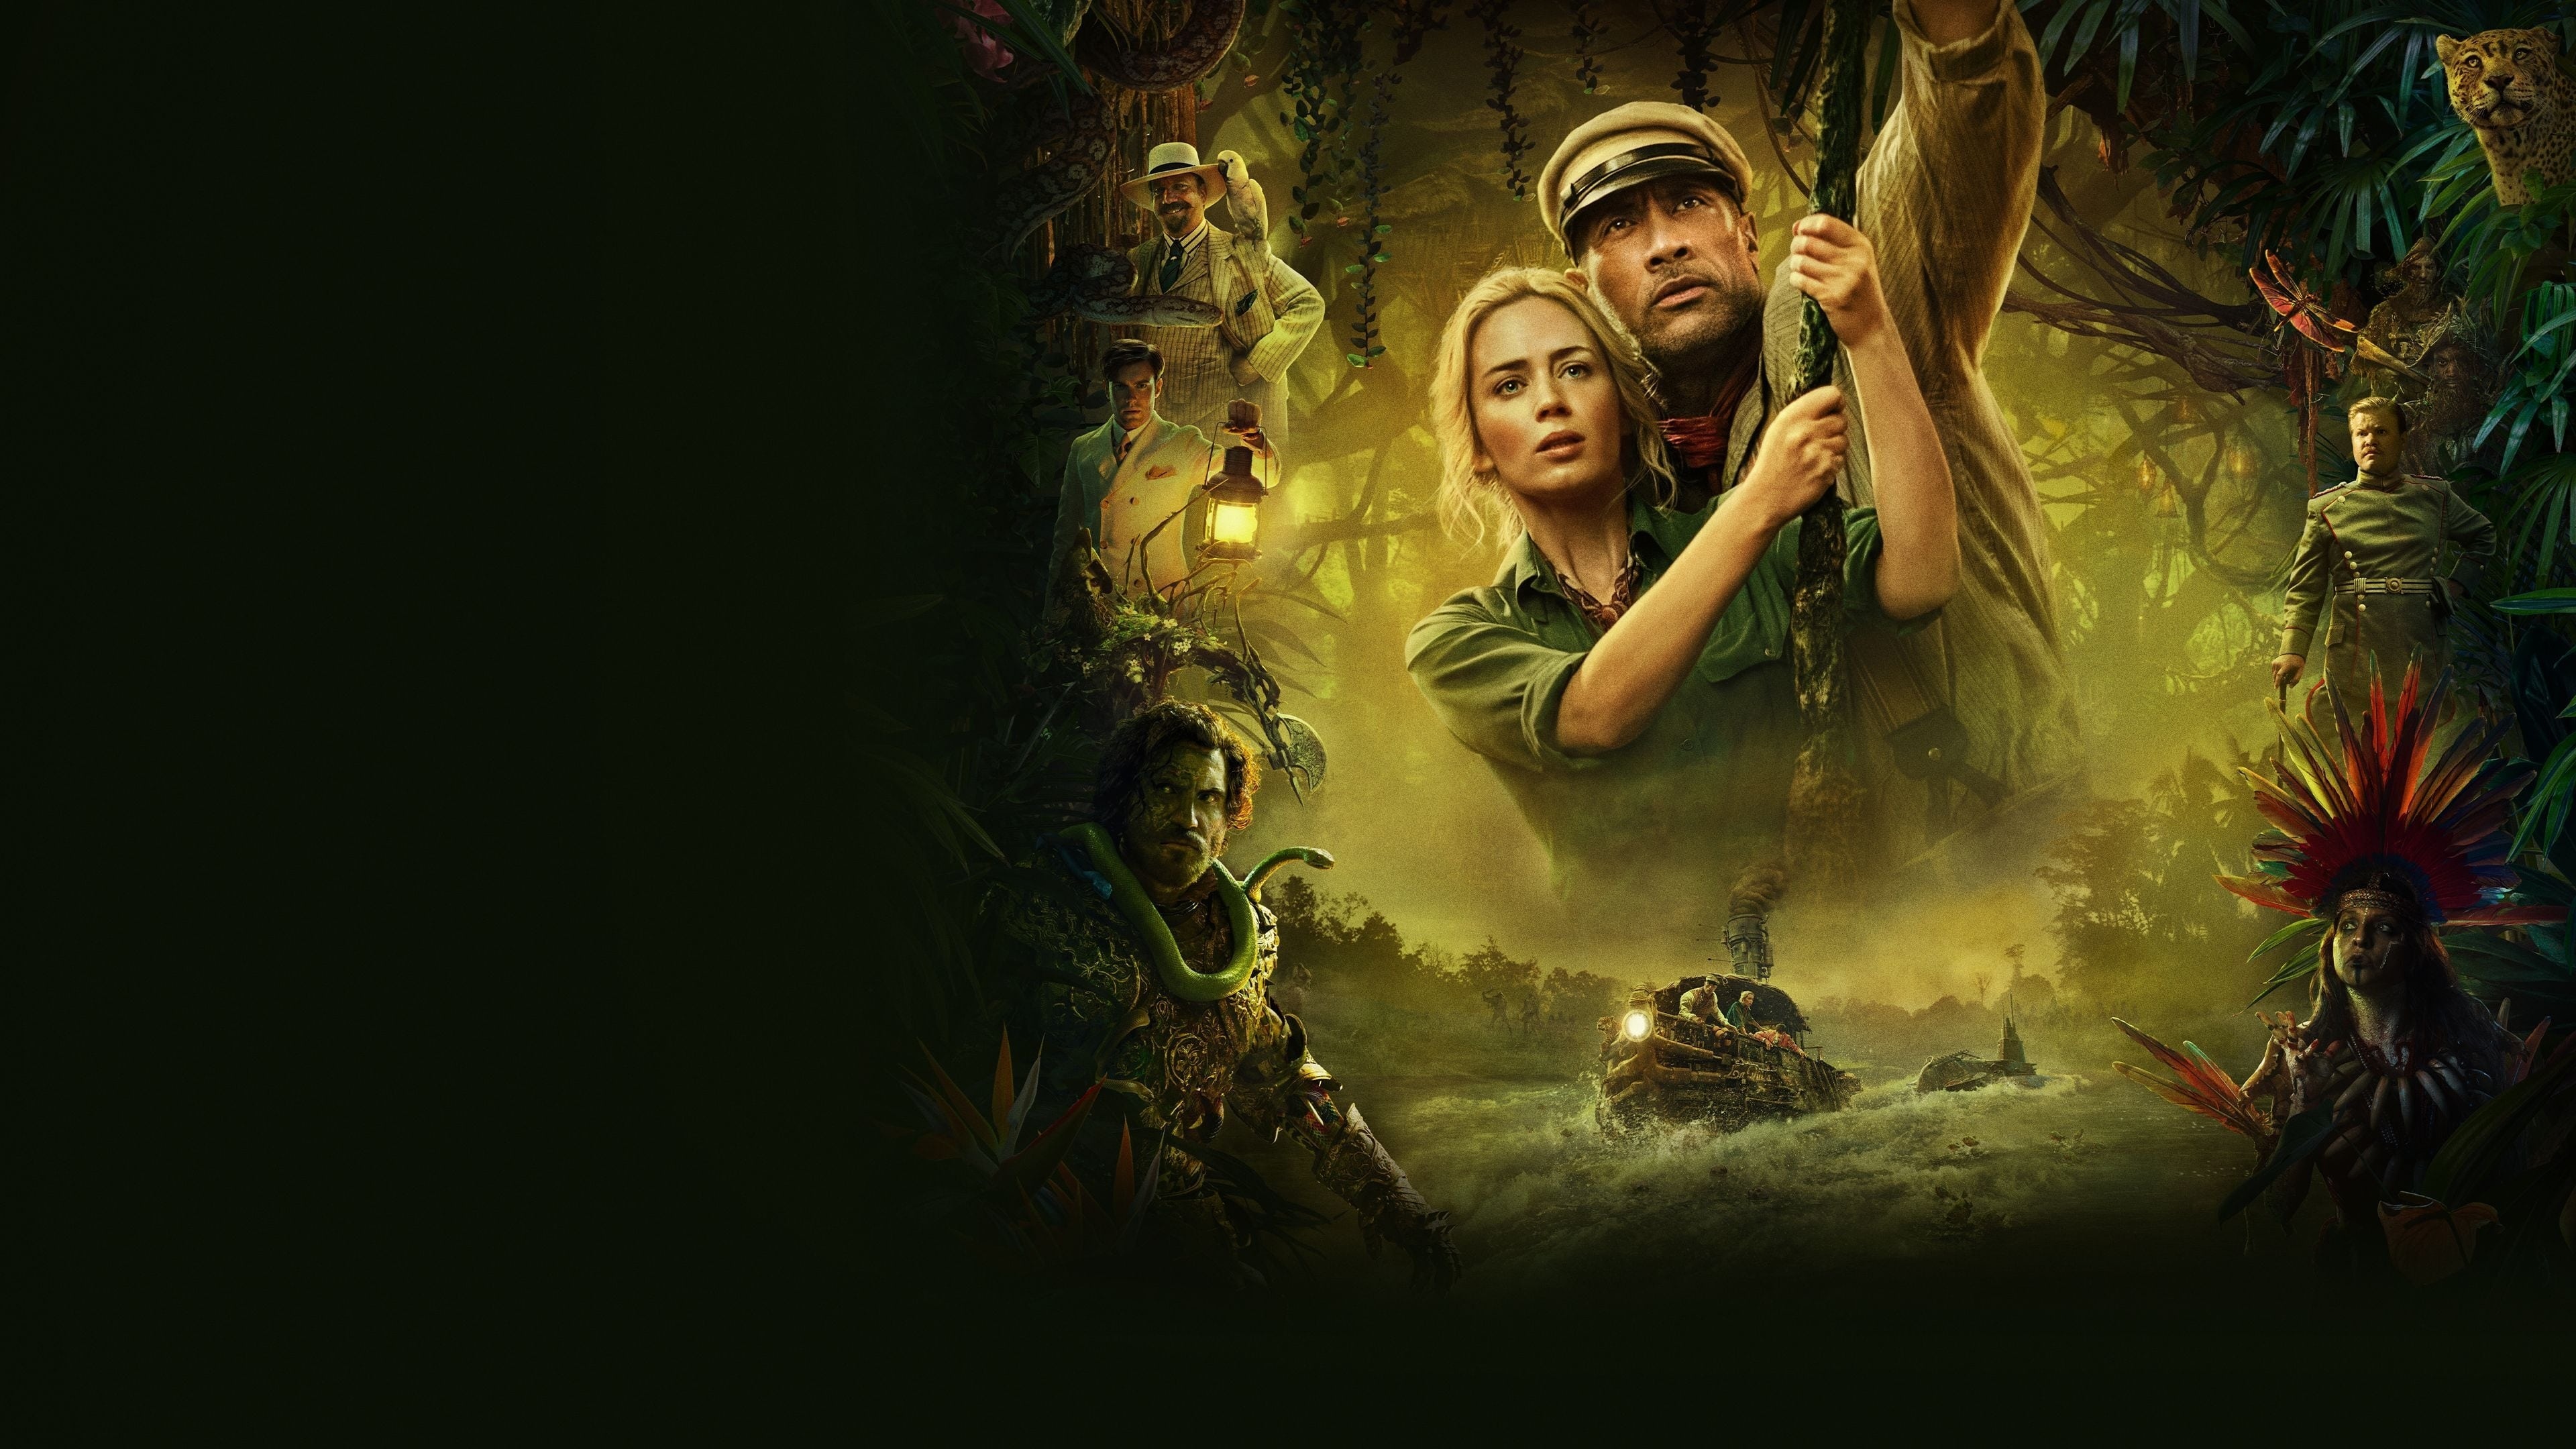 Emily Blunt: Appeared as Dr. Lily Houghton in a 2021 fantasy adventure film, Jungle Cruise. 3840x2160 4K Background.